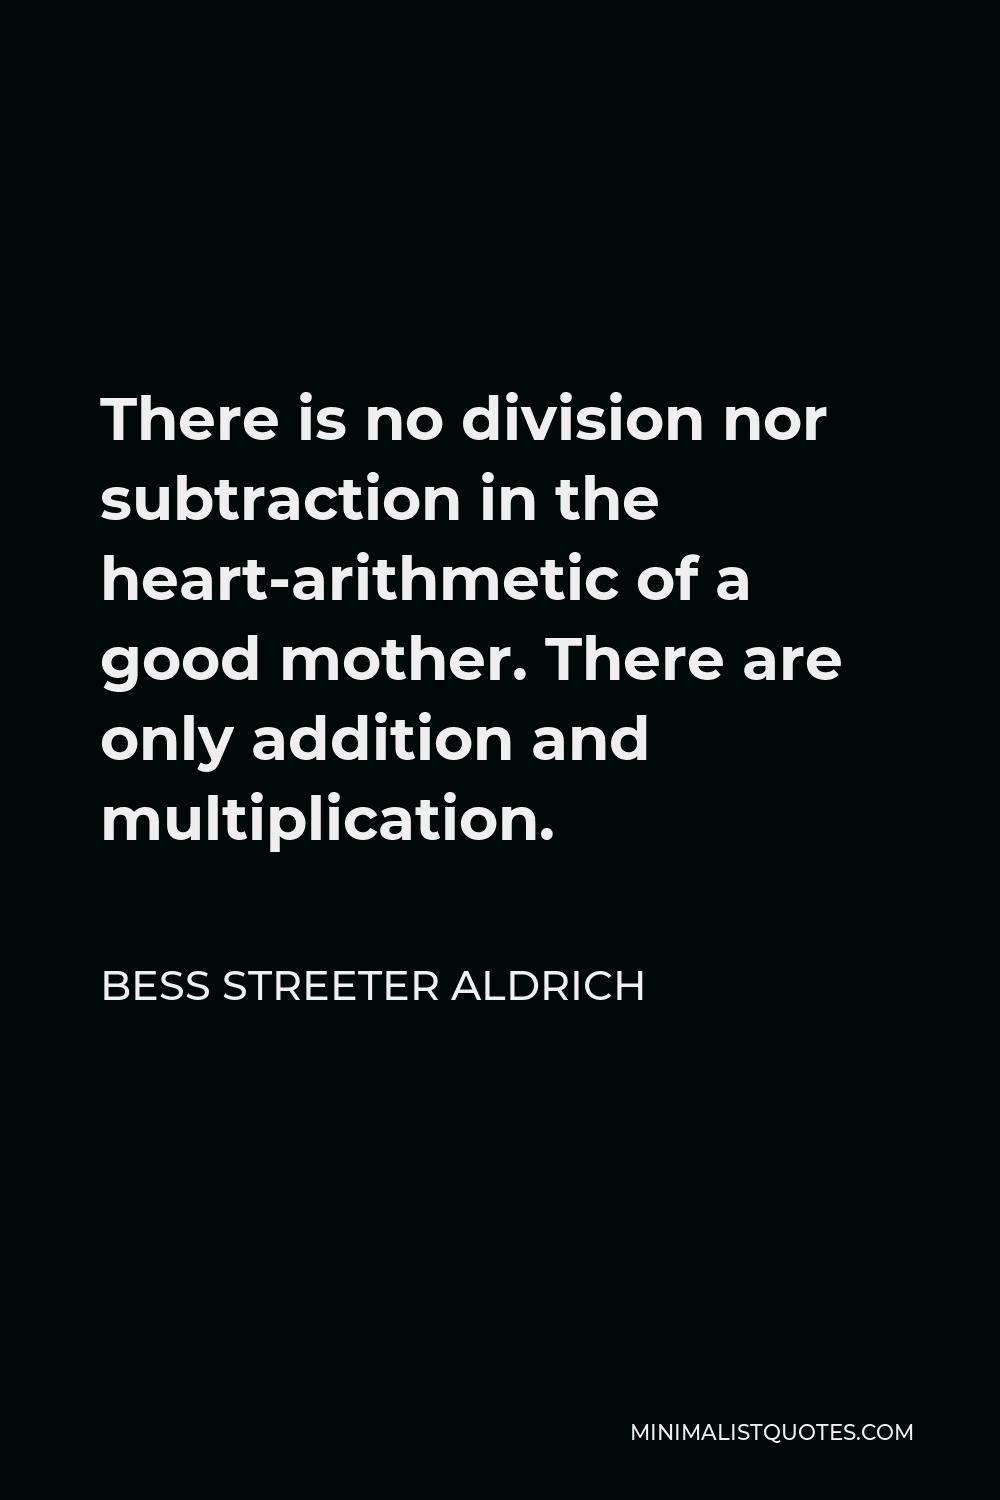 Bess Streeter Aldrich Quote - There is no division nor subtraction in the heart-arithmetic of a good mother. There are only addition and multiplication.